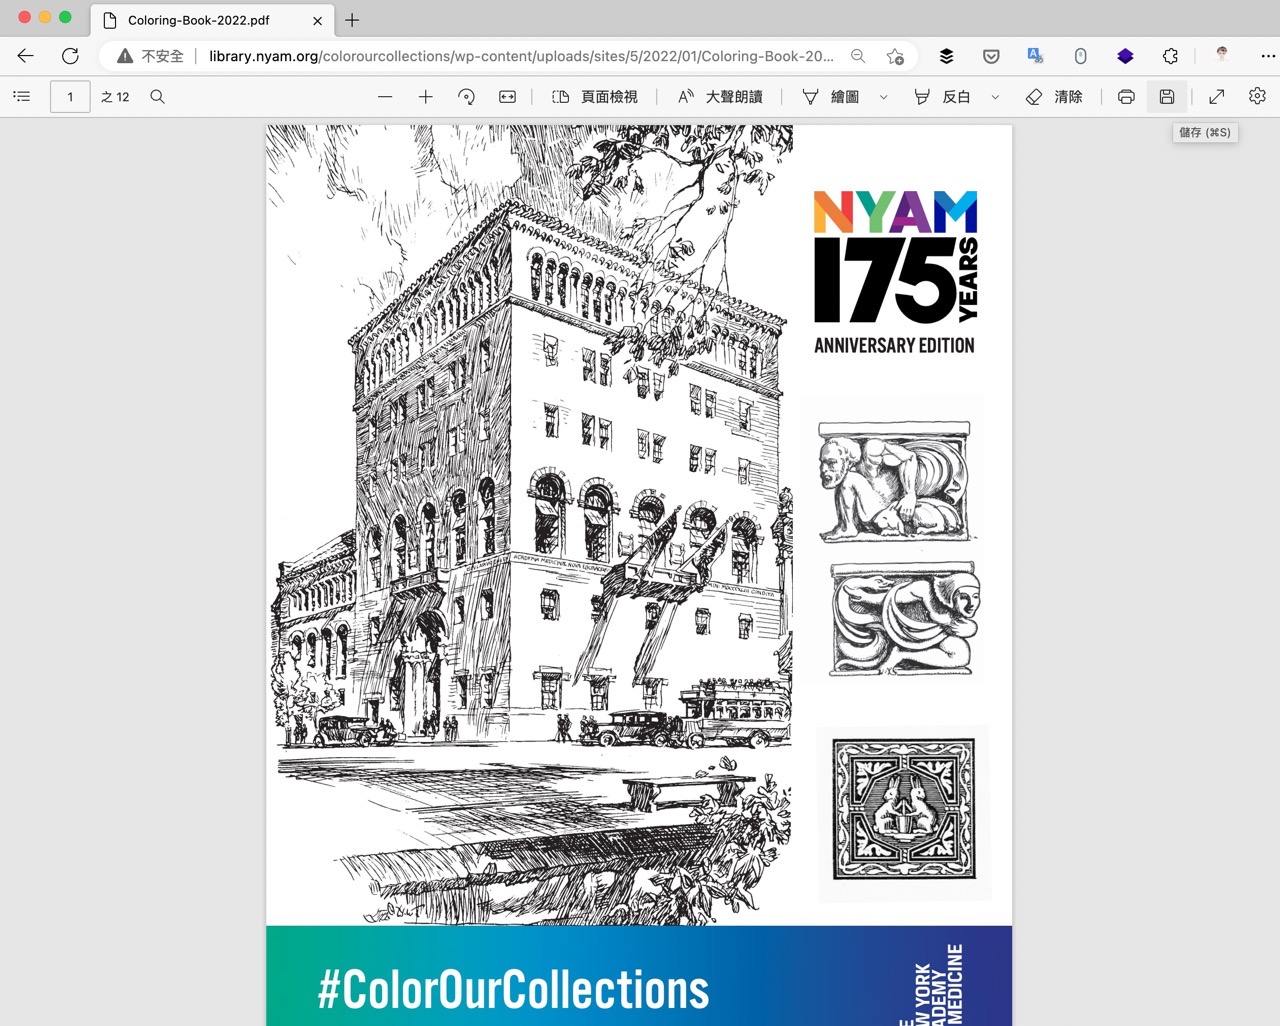 #ColorOurCollections